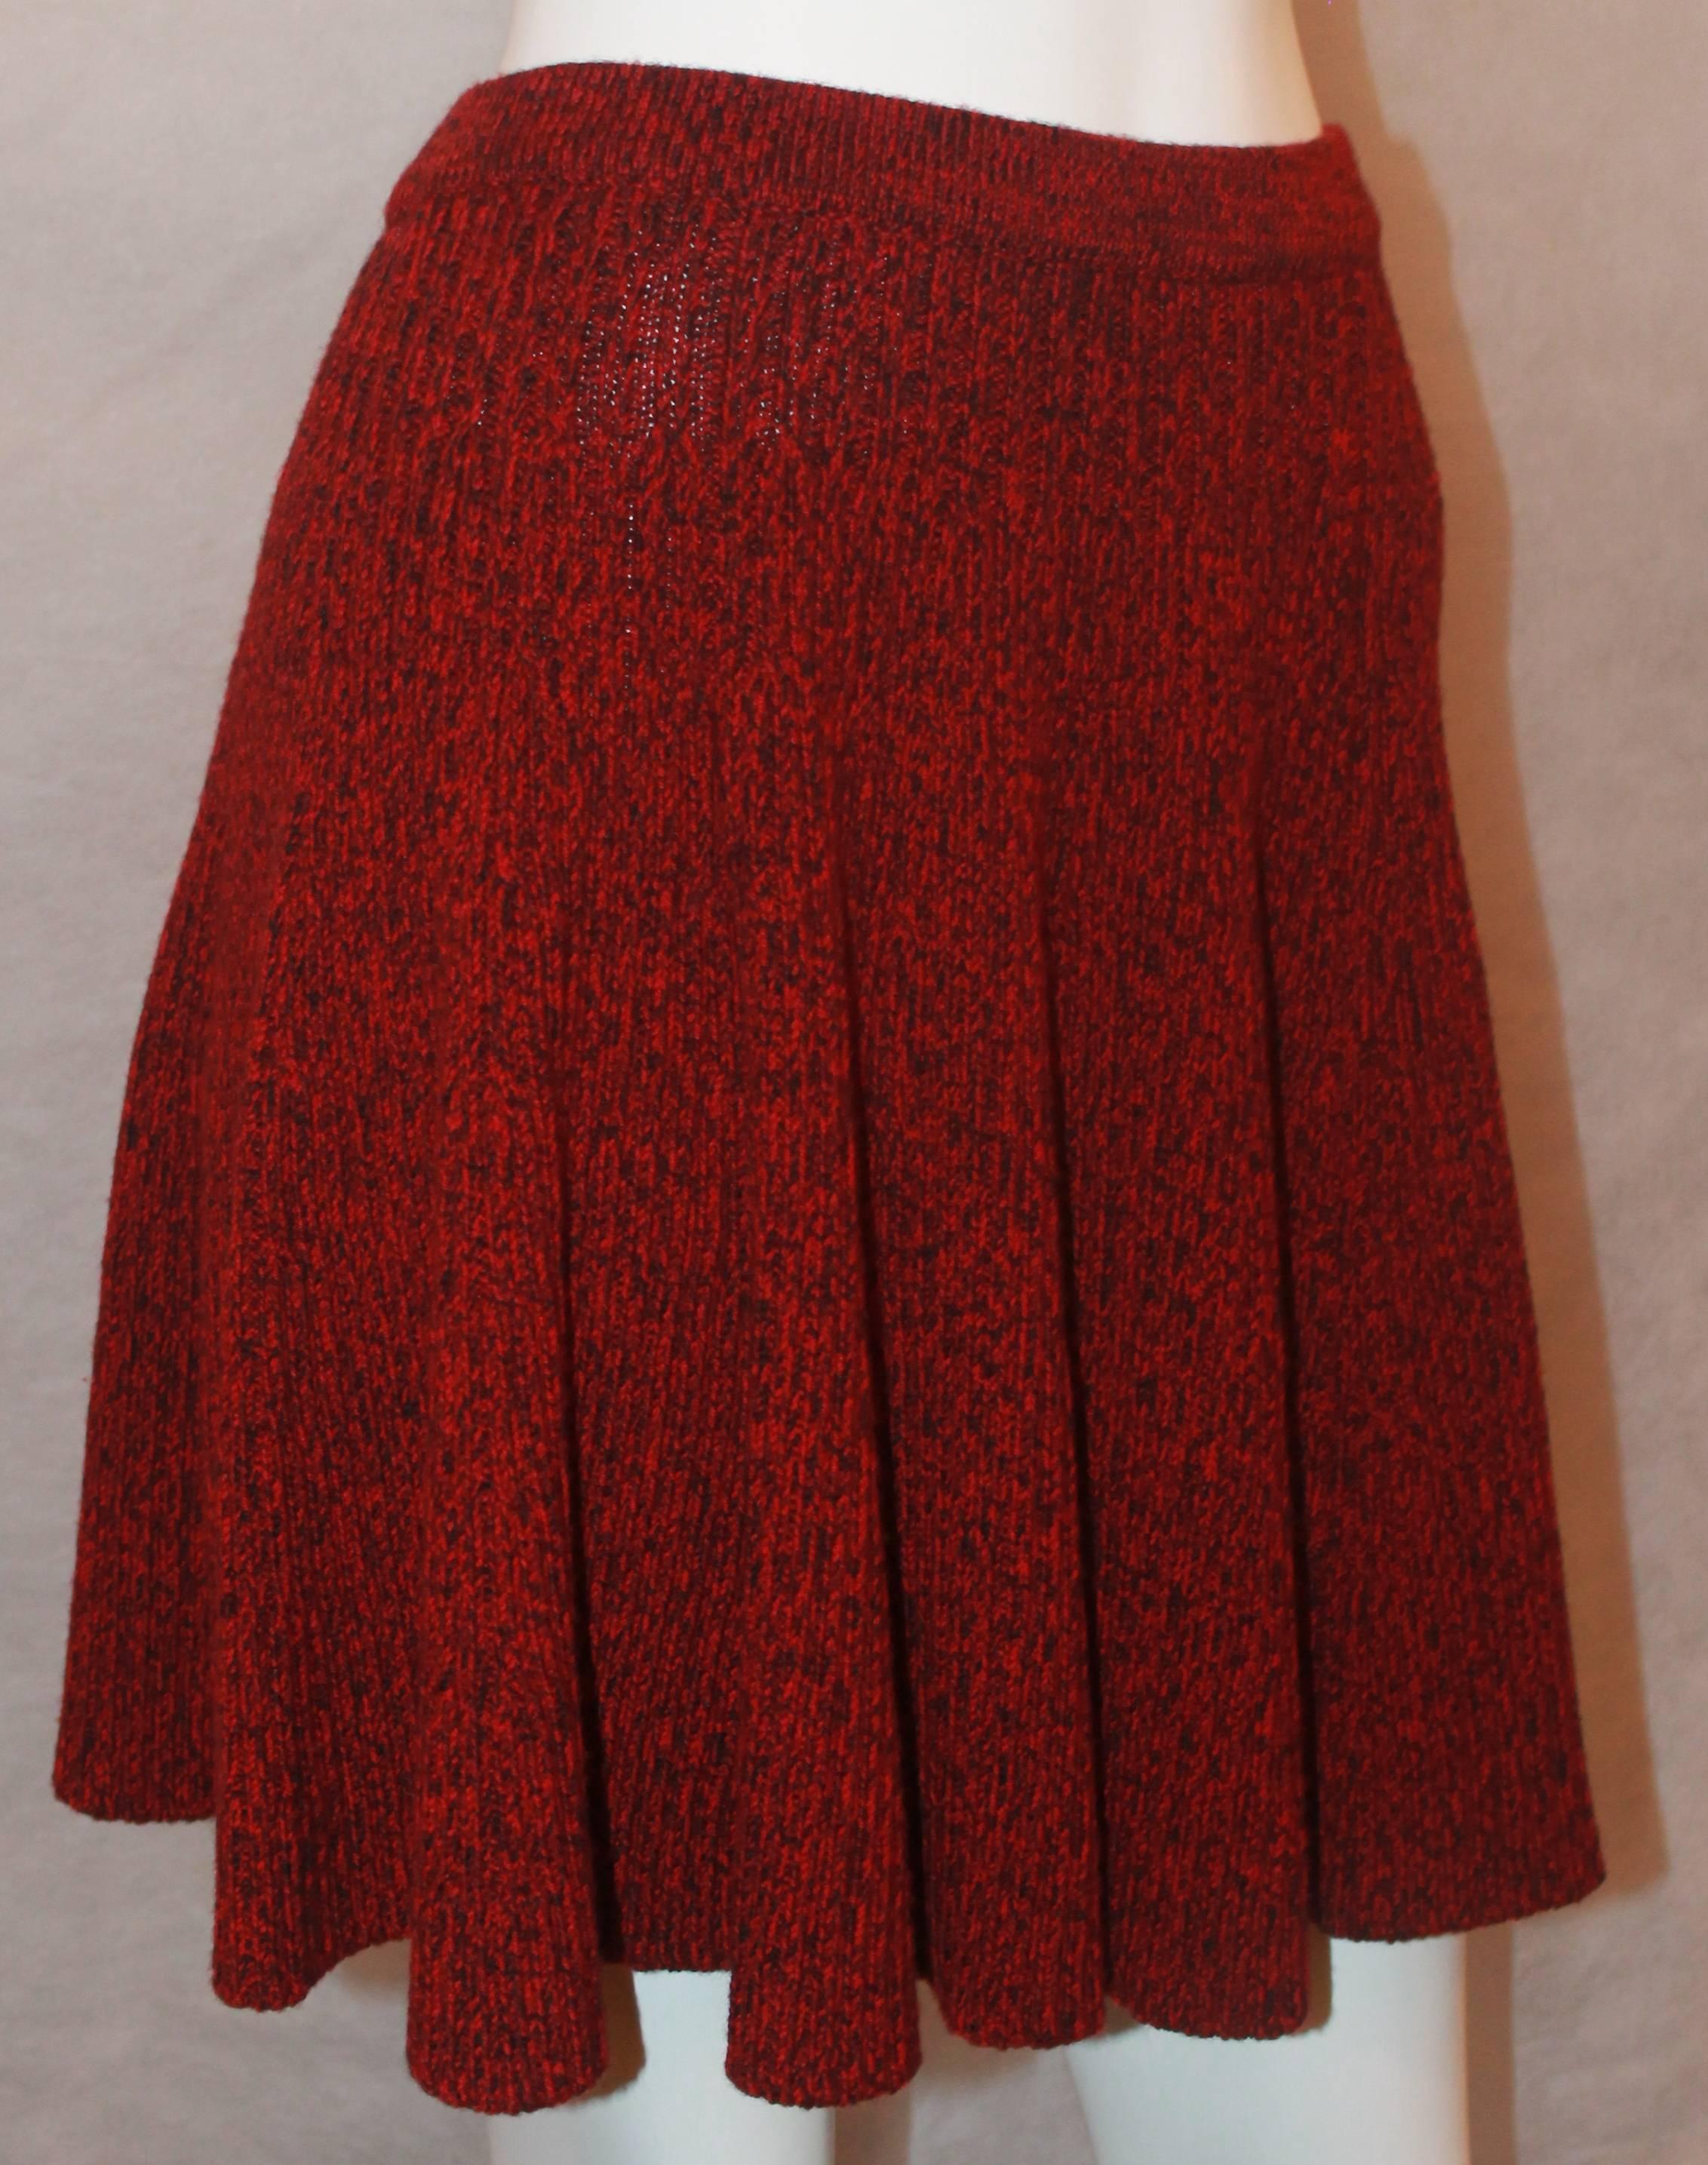 Alexander McQueen Red & Black Wool Cable Knit Flare Skirt w/ Elastic Waist - M.  This lovely skirt in excellent condition.  It is the perfect on-the-go skirt.  It features a lovely wool cable knit look, and a flare fit.

Measurements:
Waist: